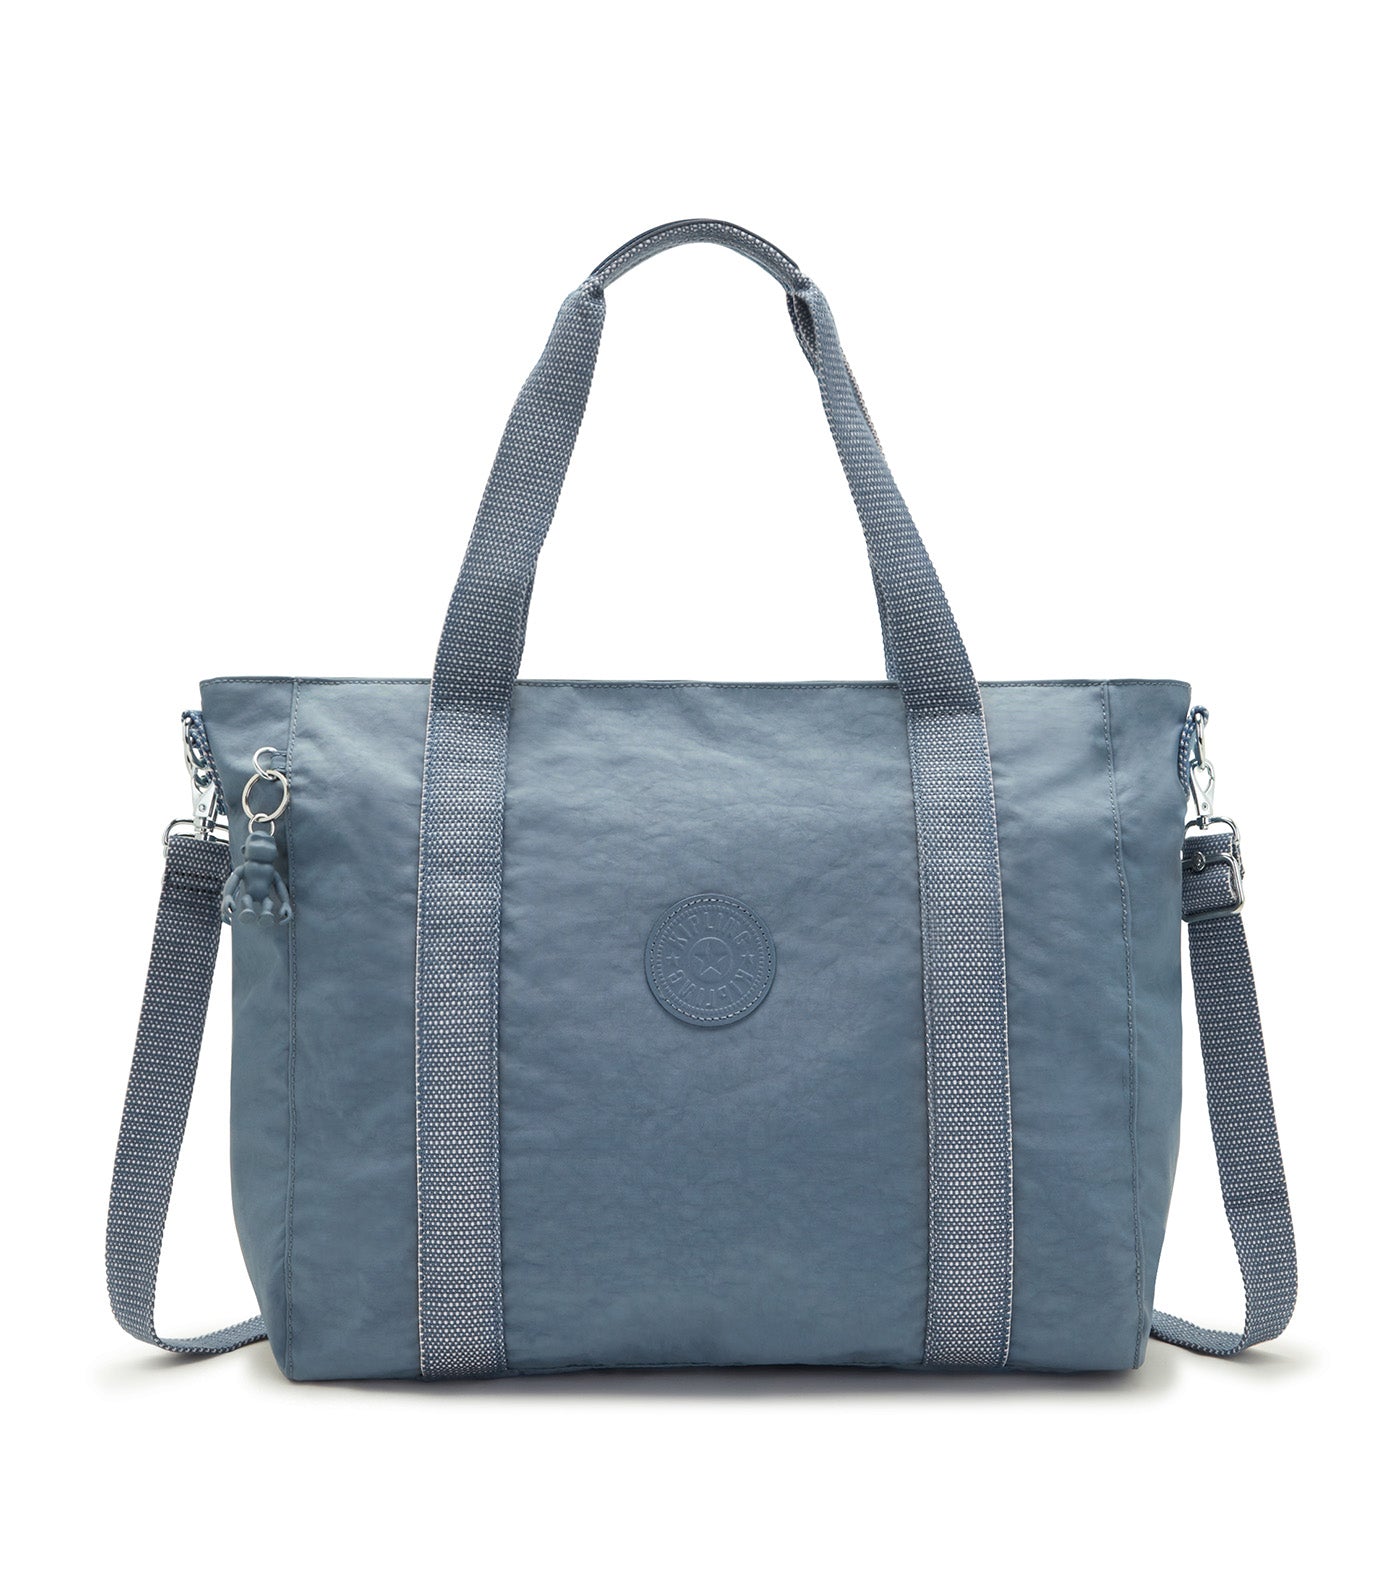 KIPLING – Discover our Bags, Backpacks, Luggages & Accessories